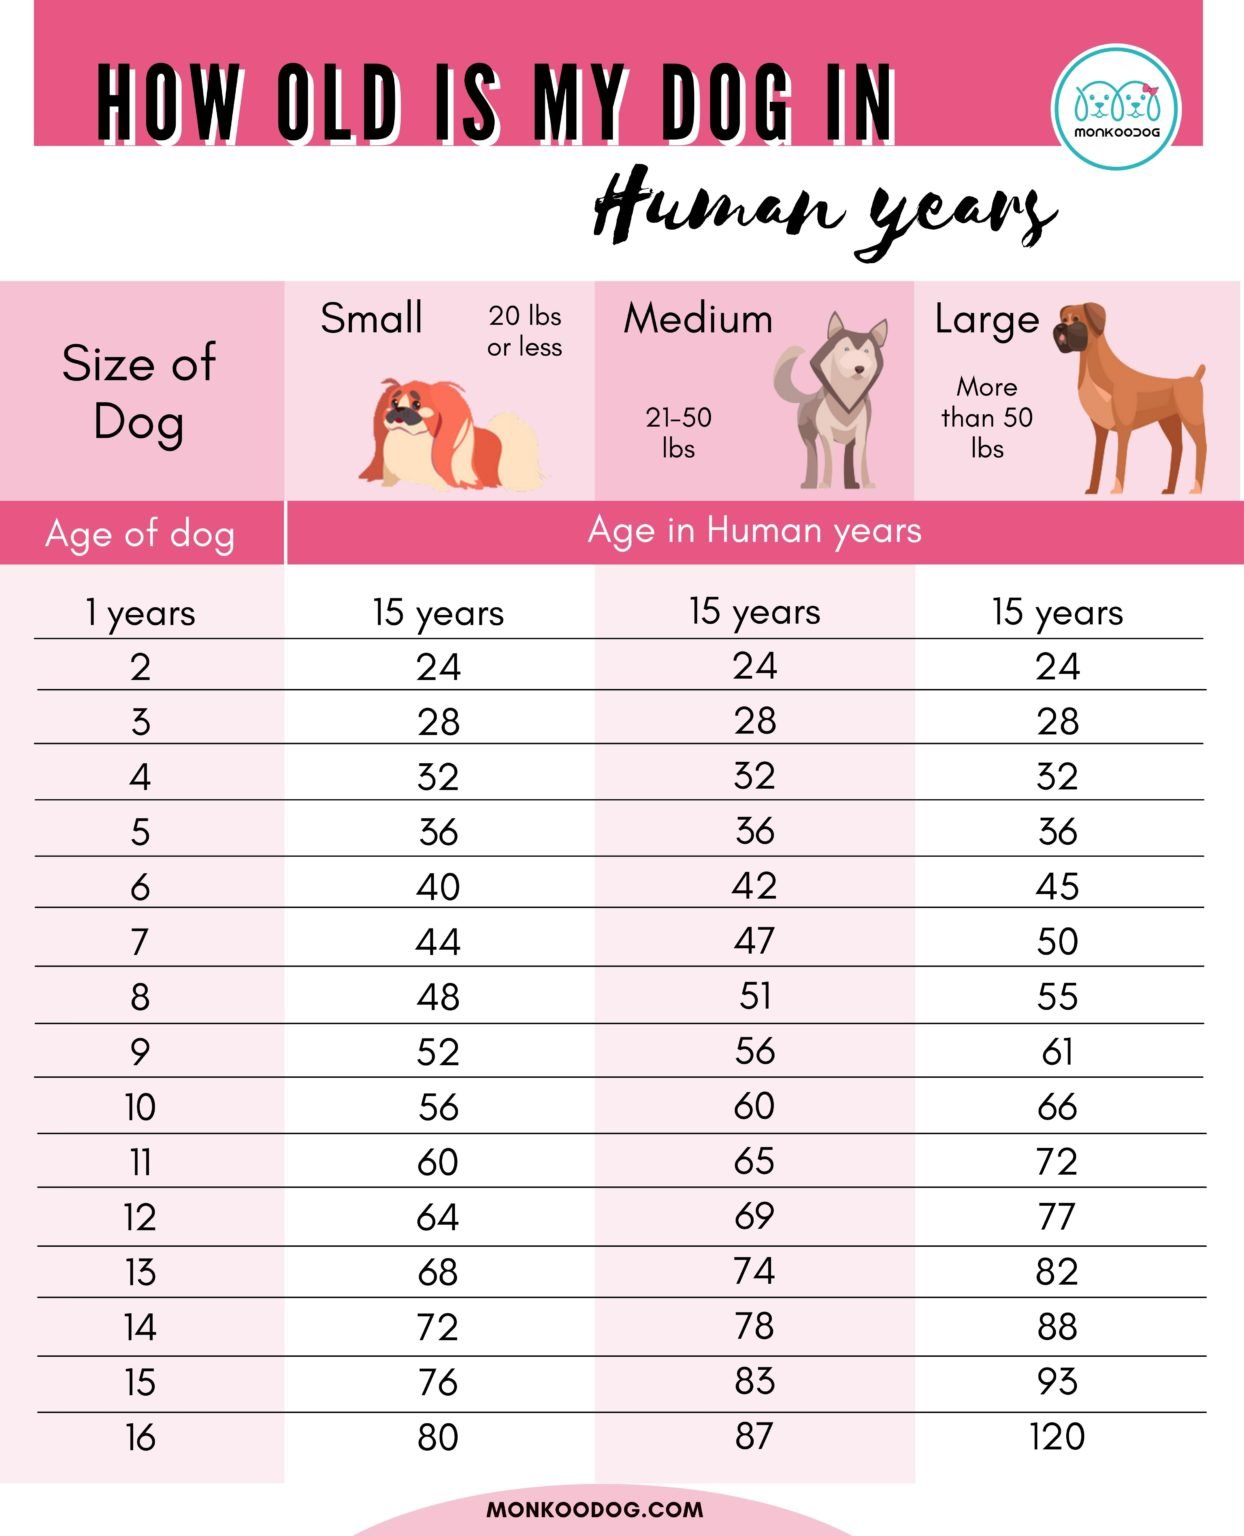 dog-age-calculator-how-old-is-my-dog-in-human-years-monkoodog